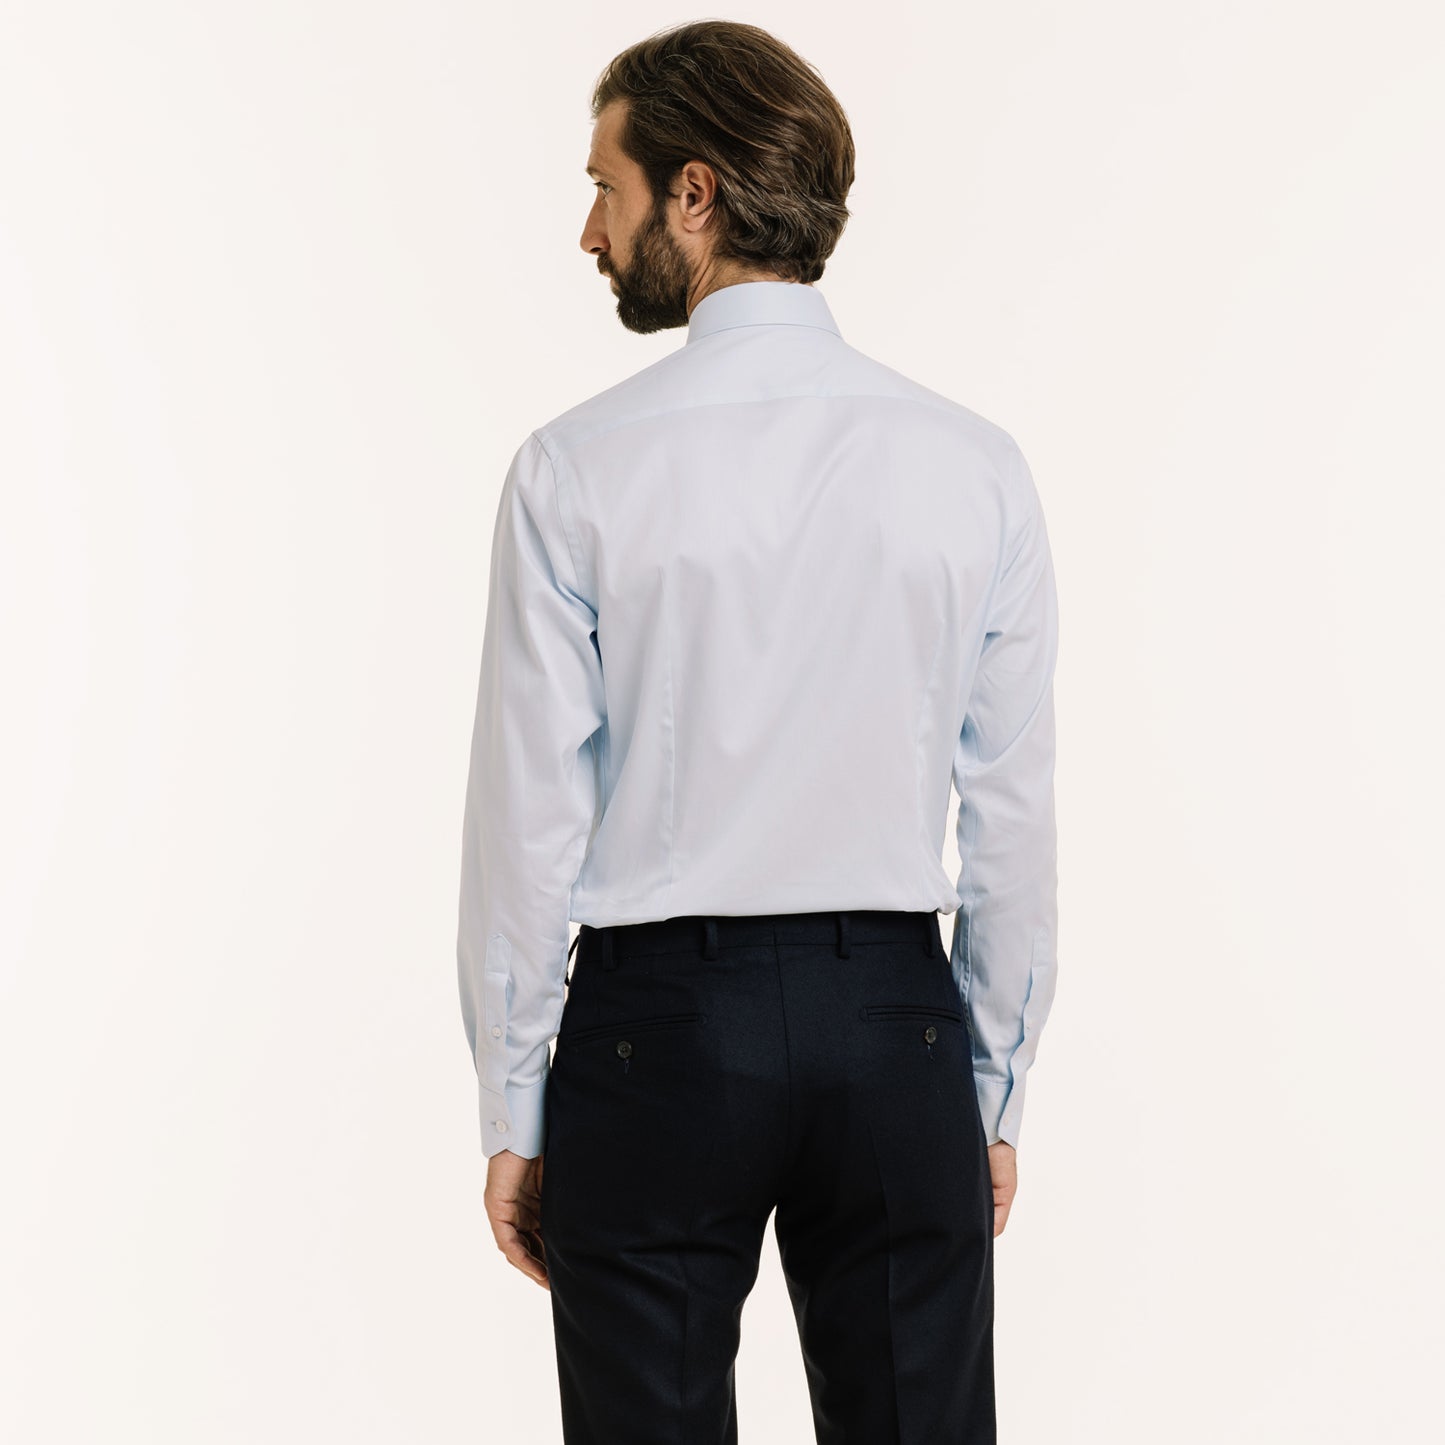 Fitted shirt in sky blue double twisted twill